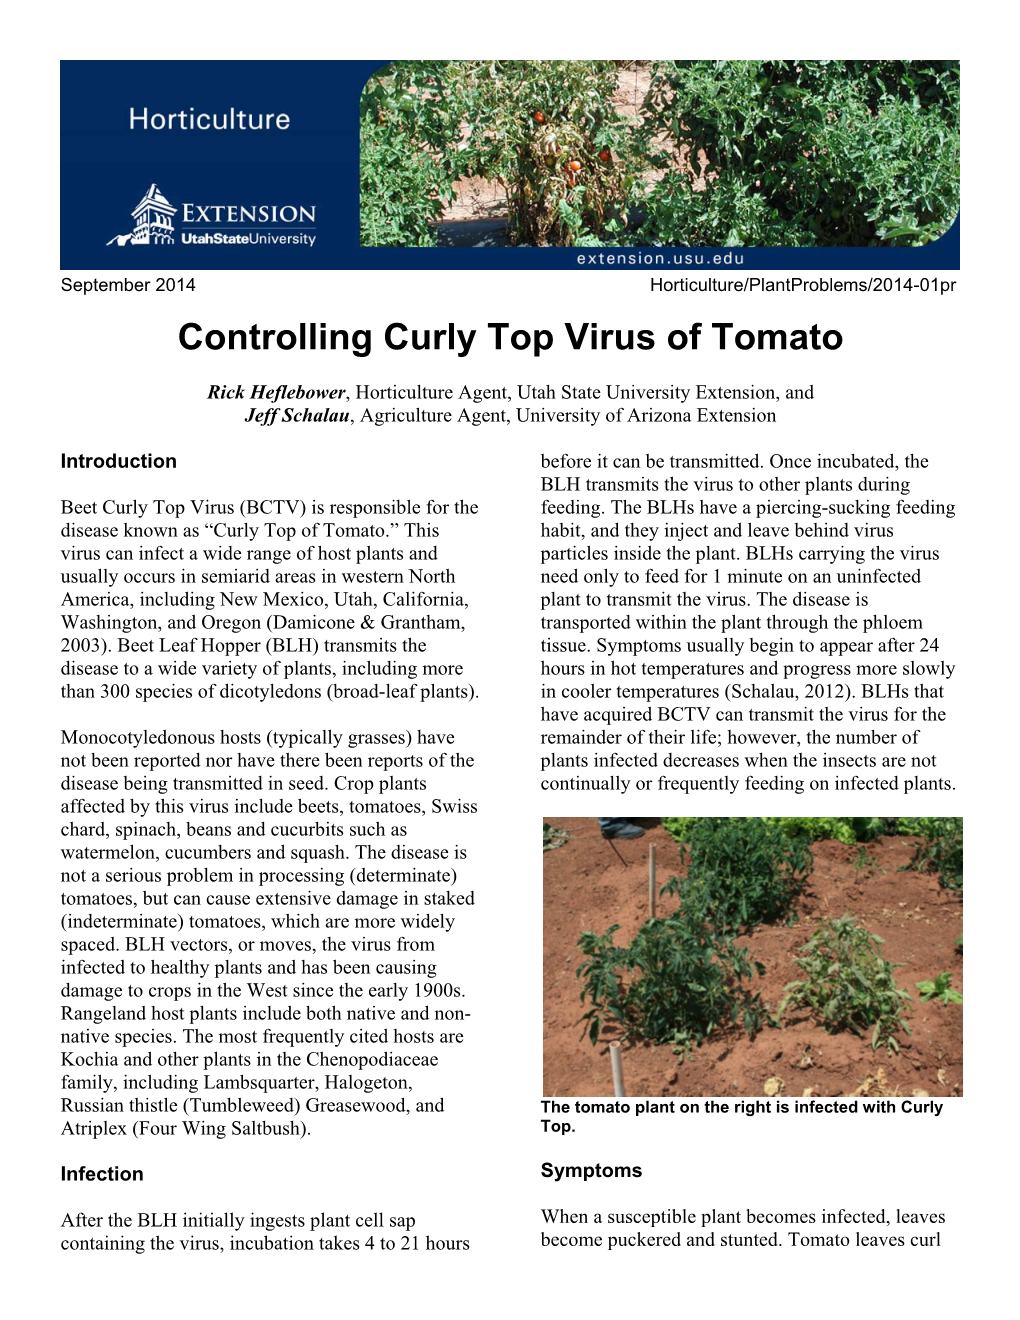 Controlling Curly Top Virus of Tomato